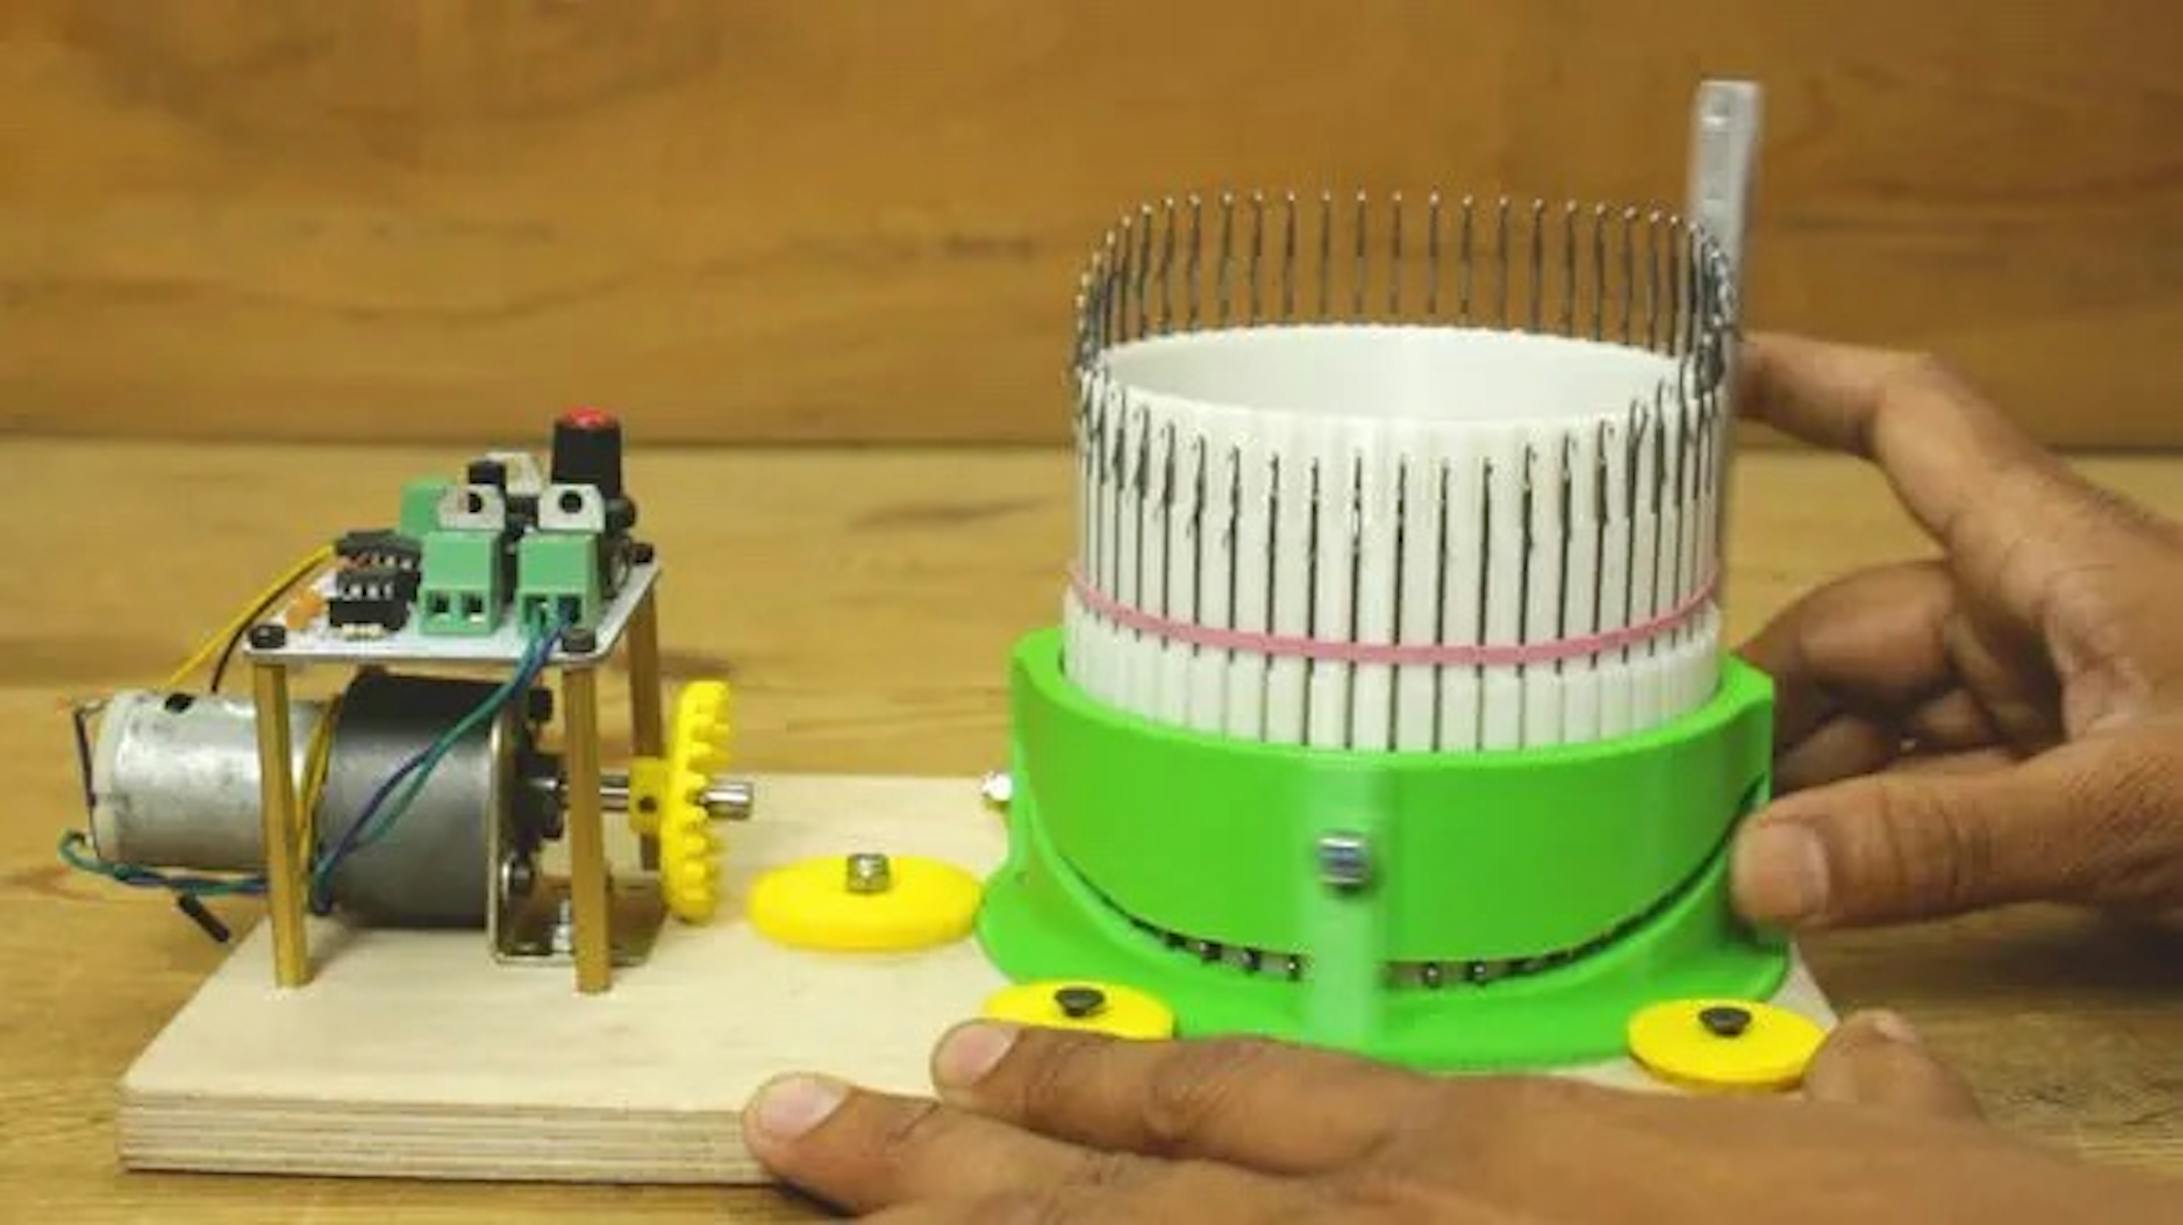 How to Fix Your Machine with a New Counter - Works for All Circular Knitting  Machines 